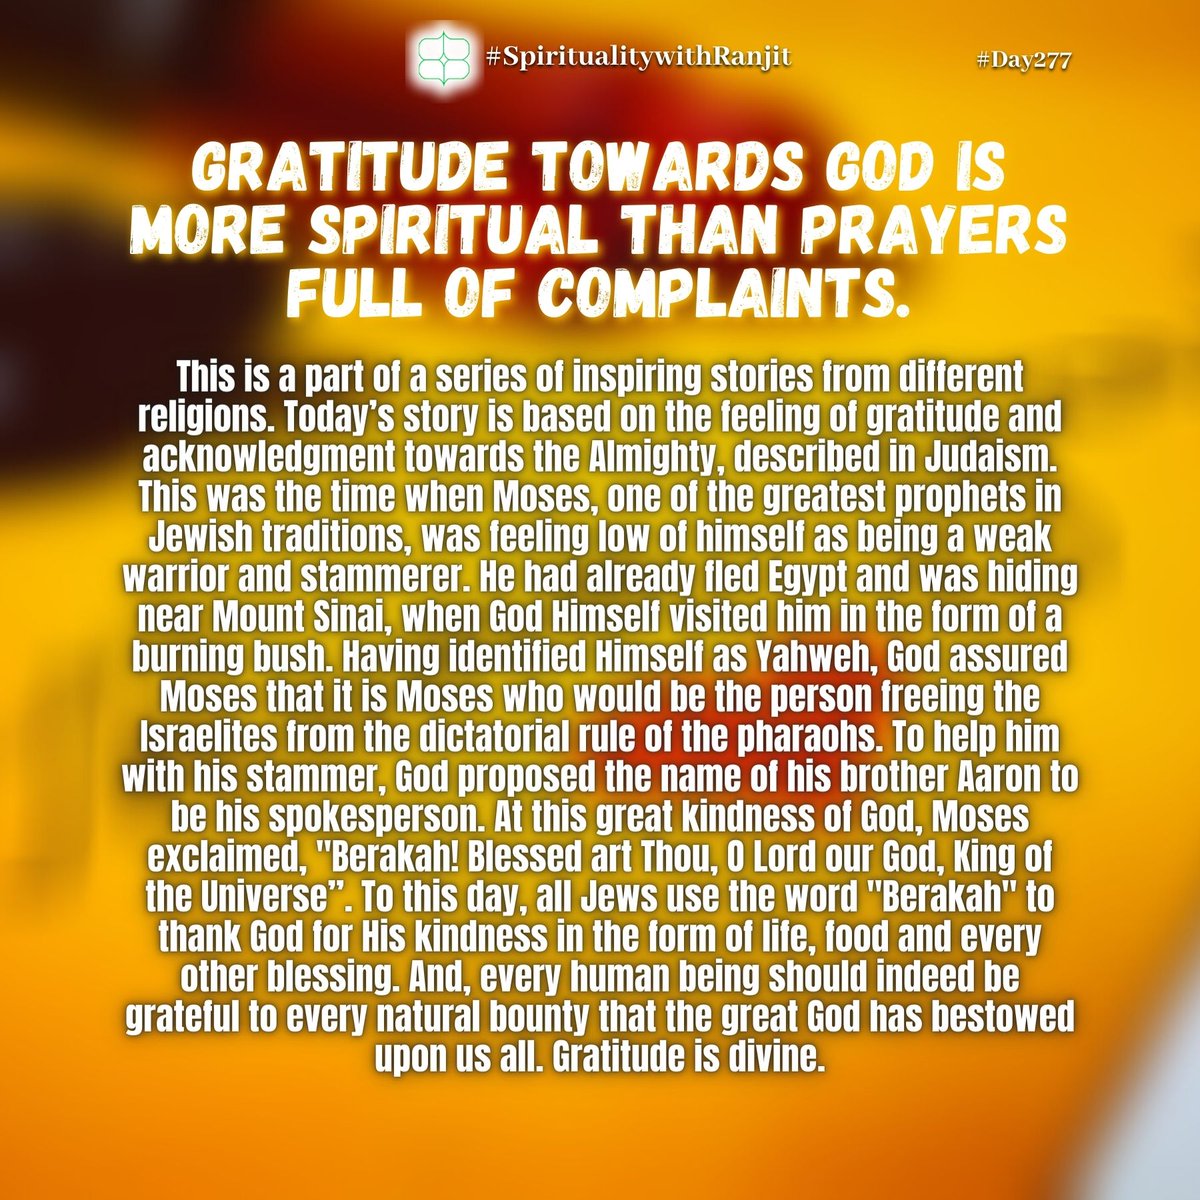 Do read all the messages in this thread! Retweet if you like. (2/5) #Post277  #SpiritualitywithRanjit  #Gratitude  #Berakah  #Moses  #Acknowledgement  #Interfaith